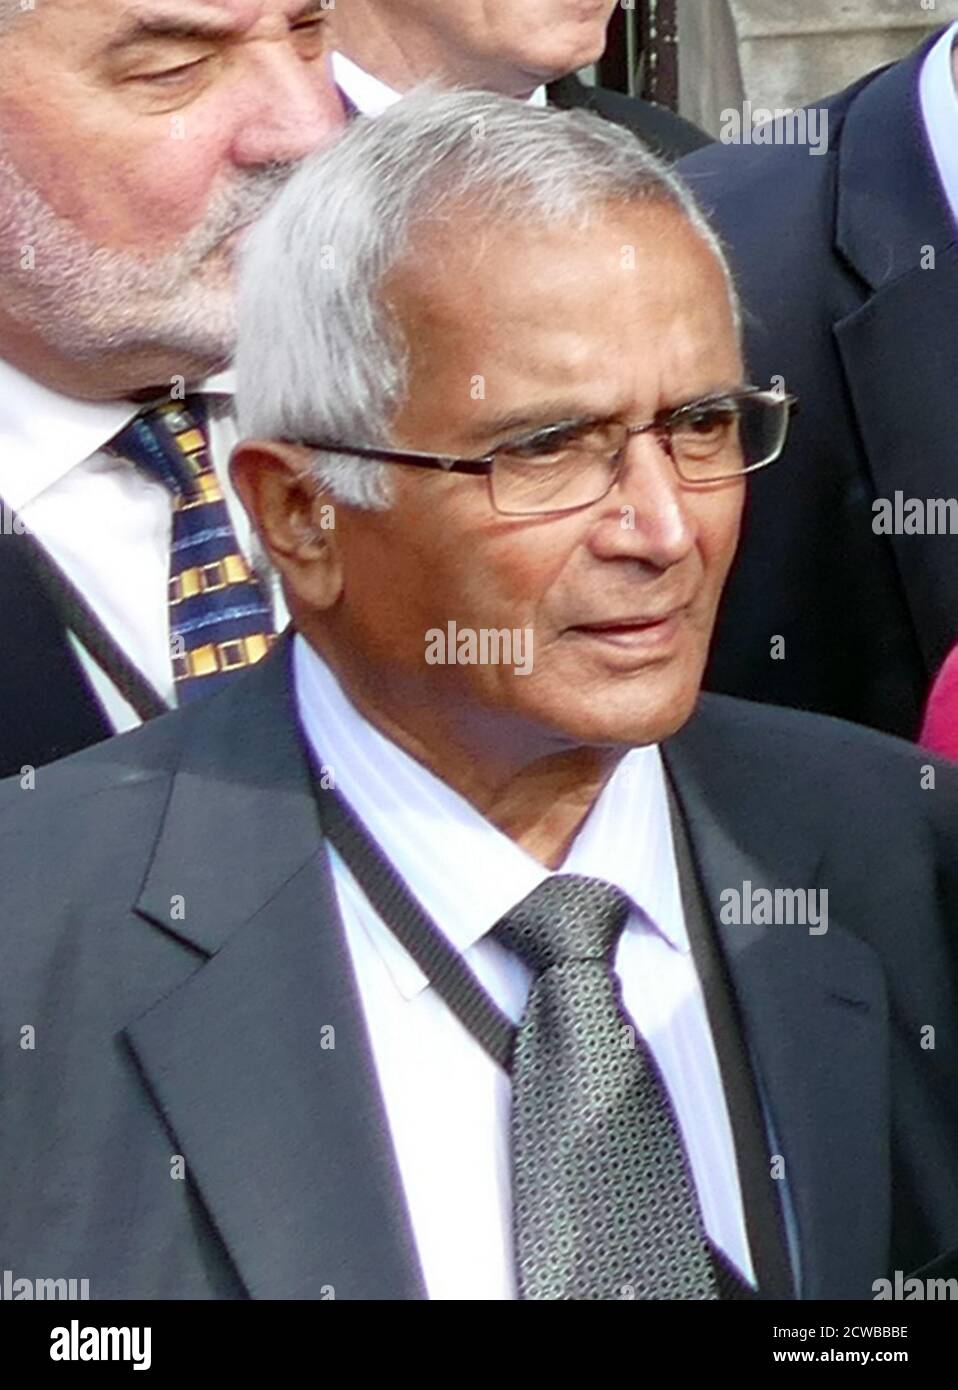 Navnit Dholakia, Baron Dholakia (born 1937), British Liberal Democrat politician and the Deputy Leader of the Liberal Democrats in the House of Lords. Stock Photo